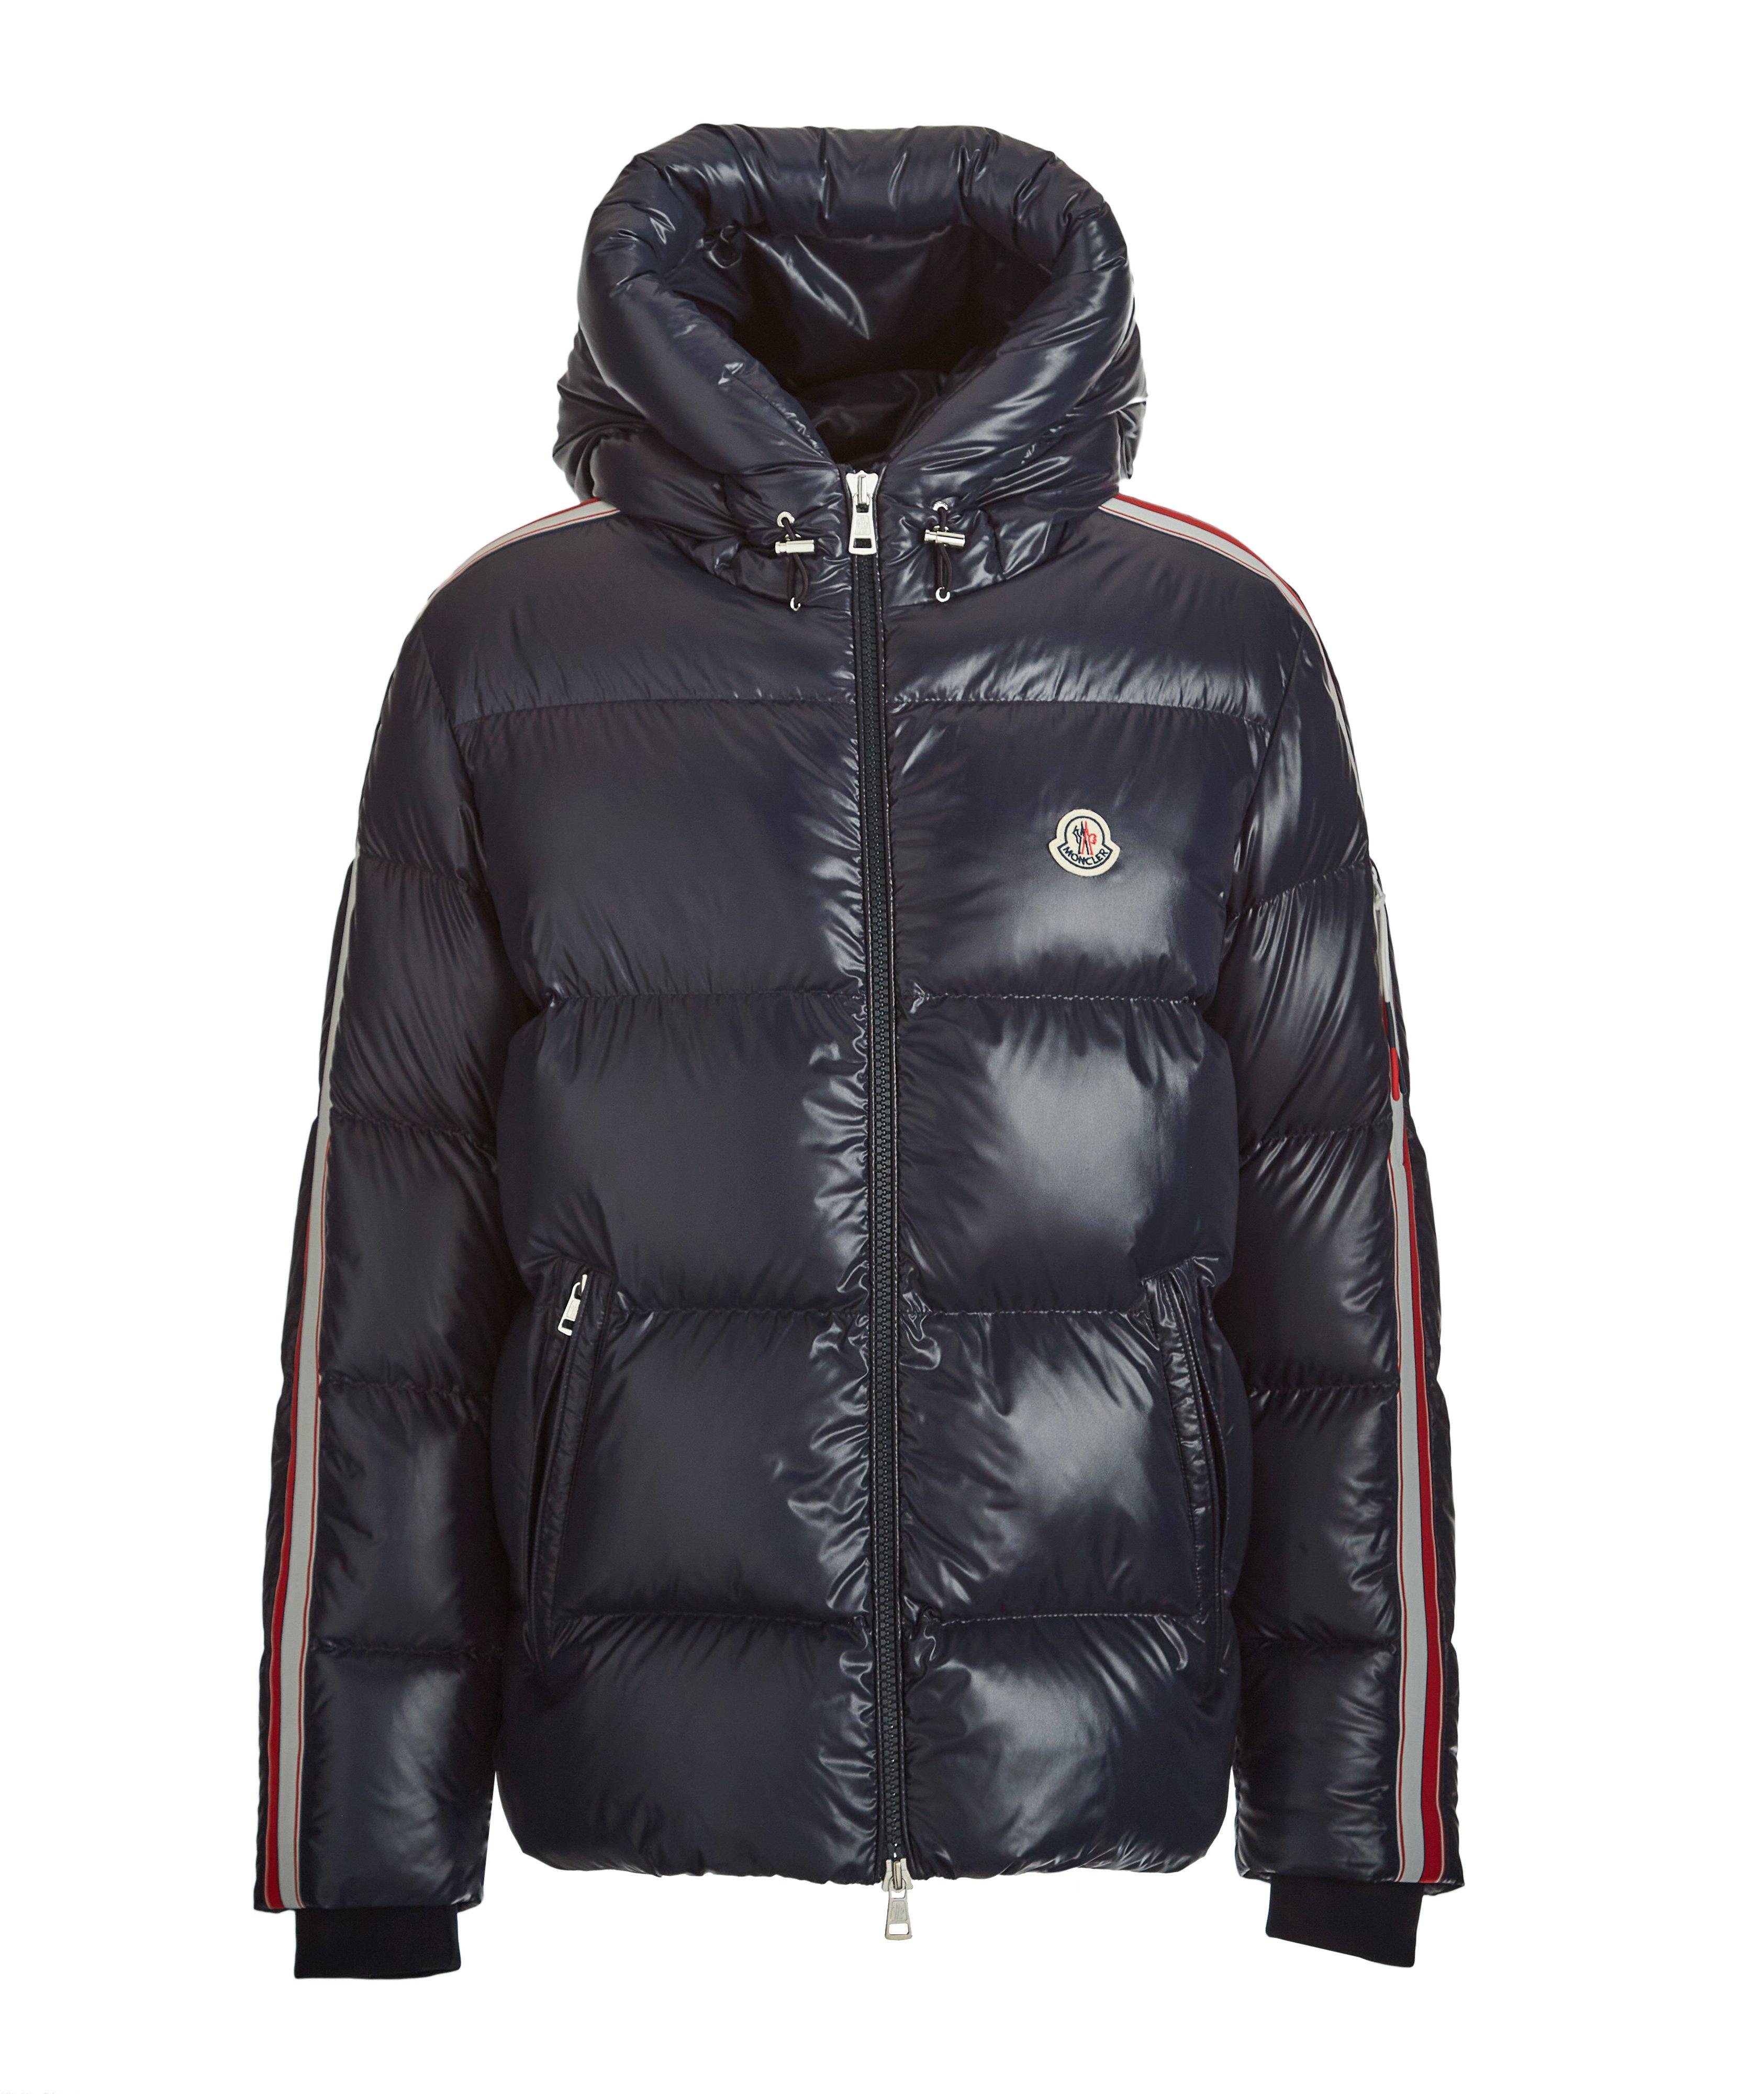 Dincer Hooded Quilted Down Jacket image 0